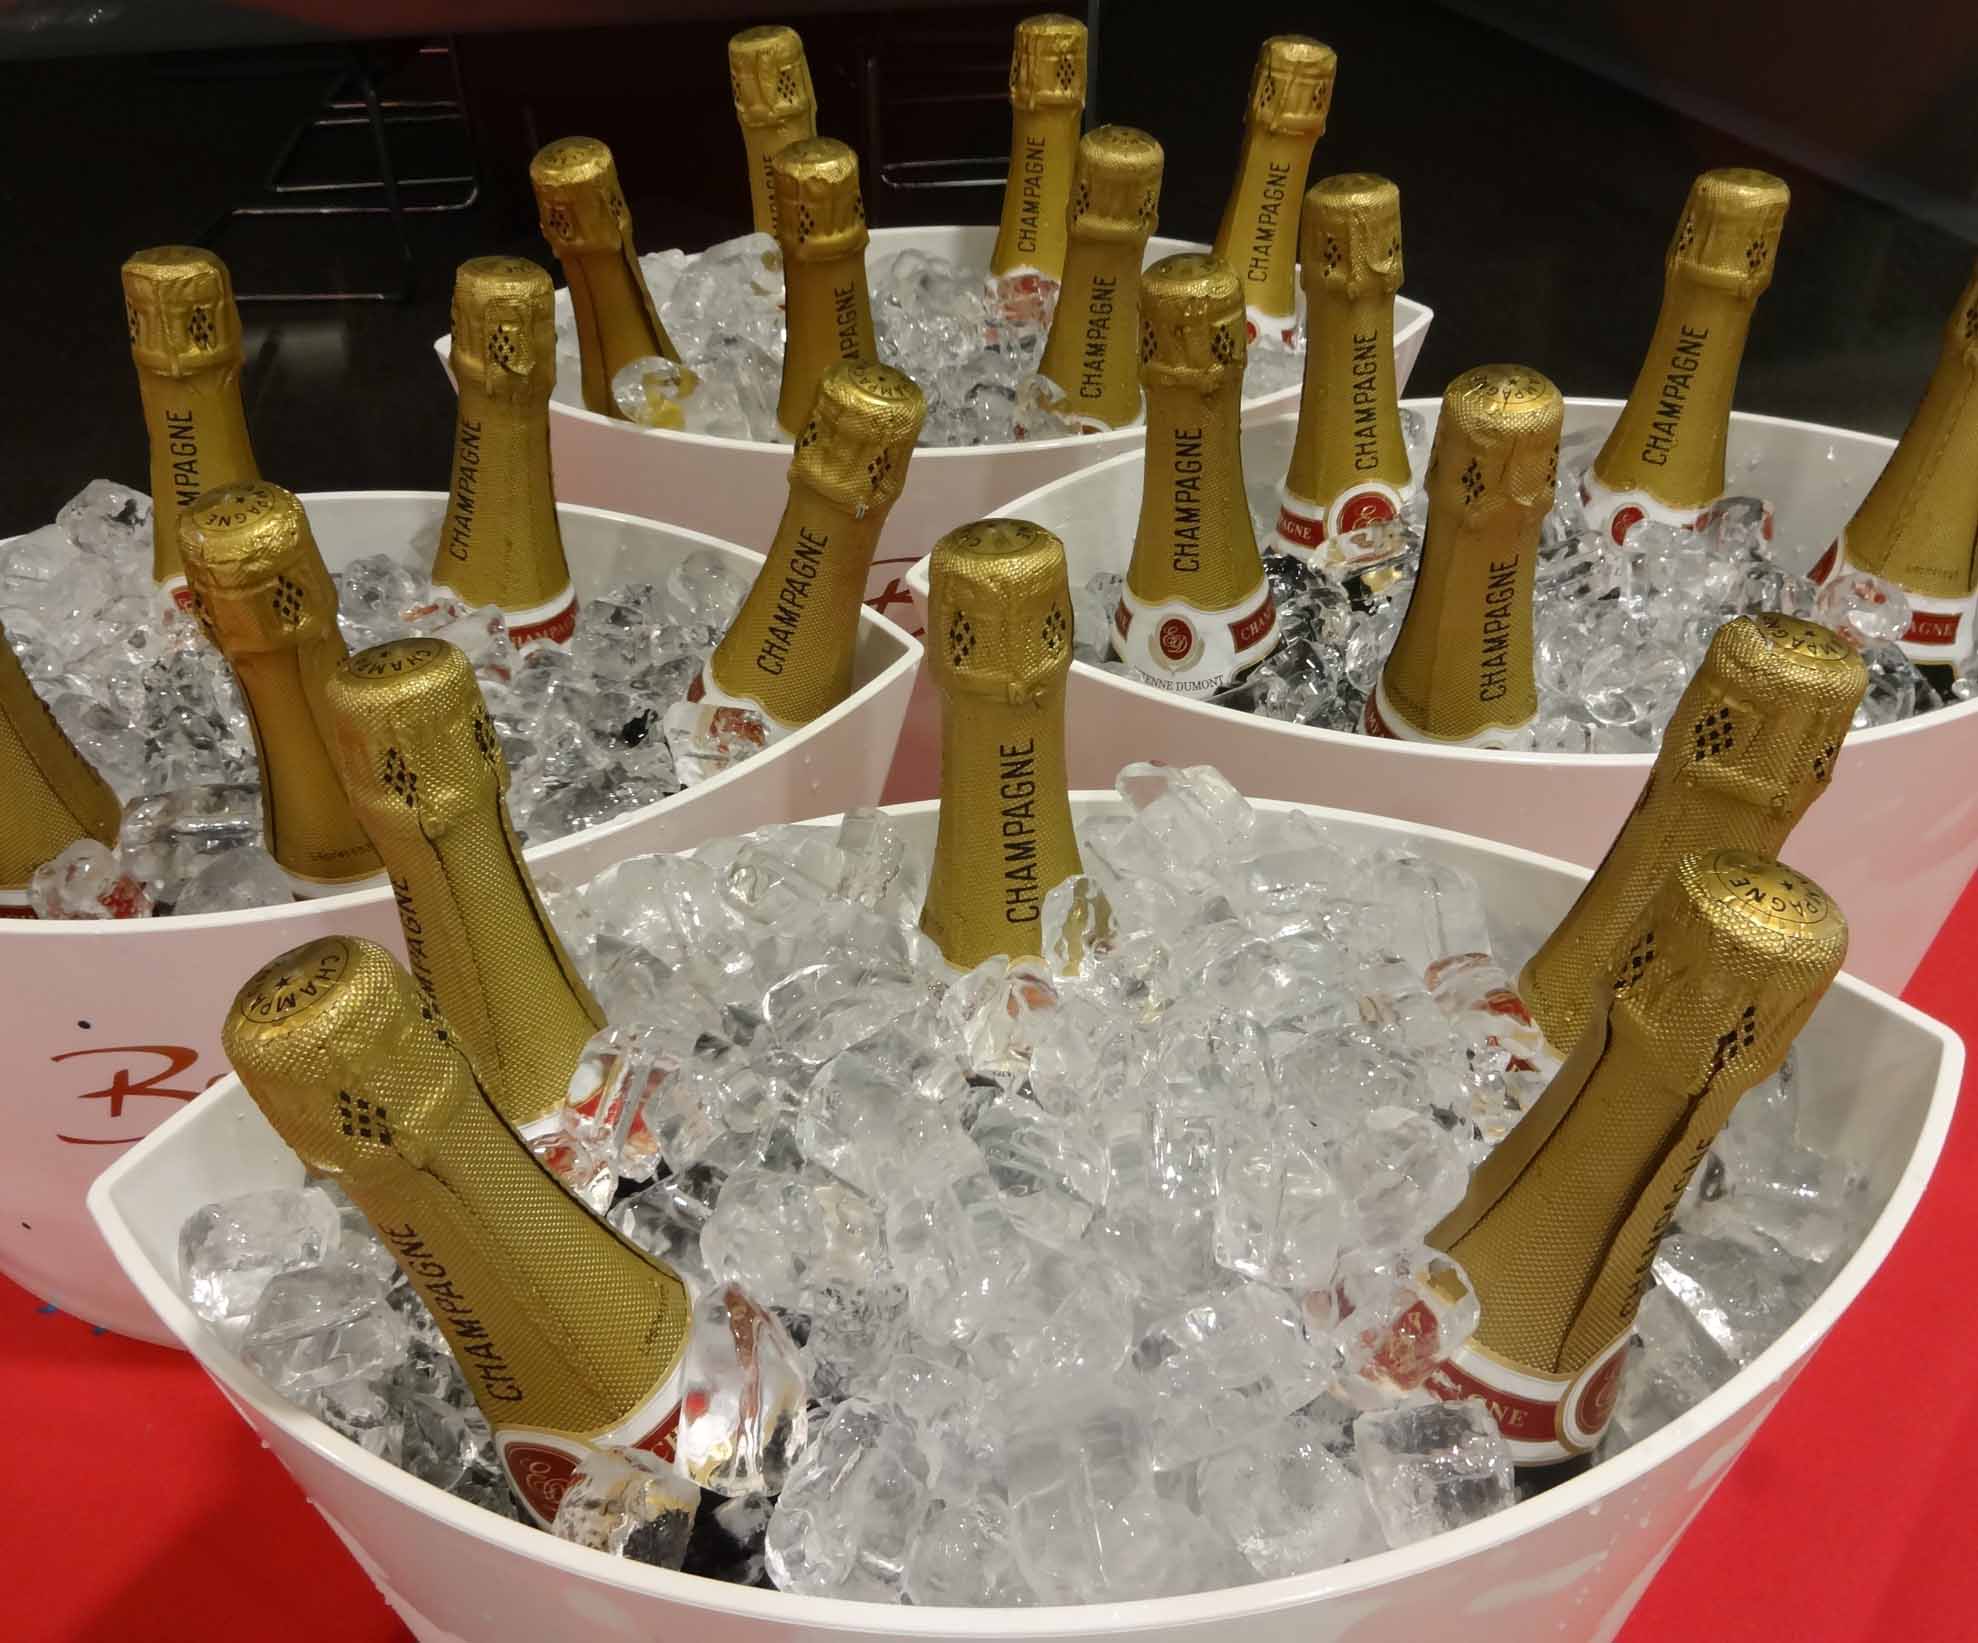 Four buckets filled with champagne bottles chilling on ice at a festive party, ready to be served to guests.